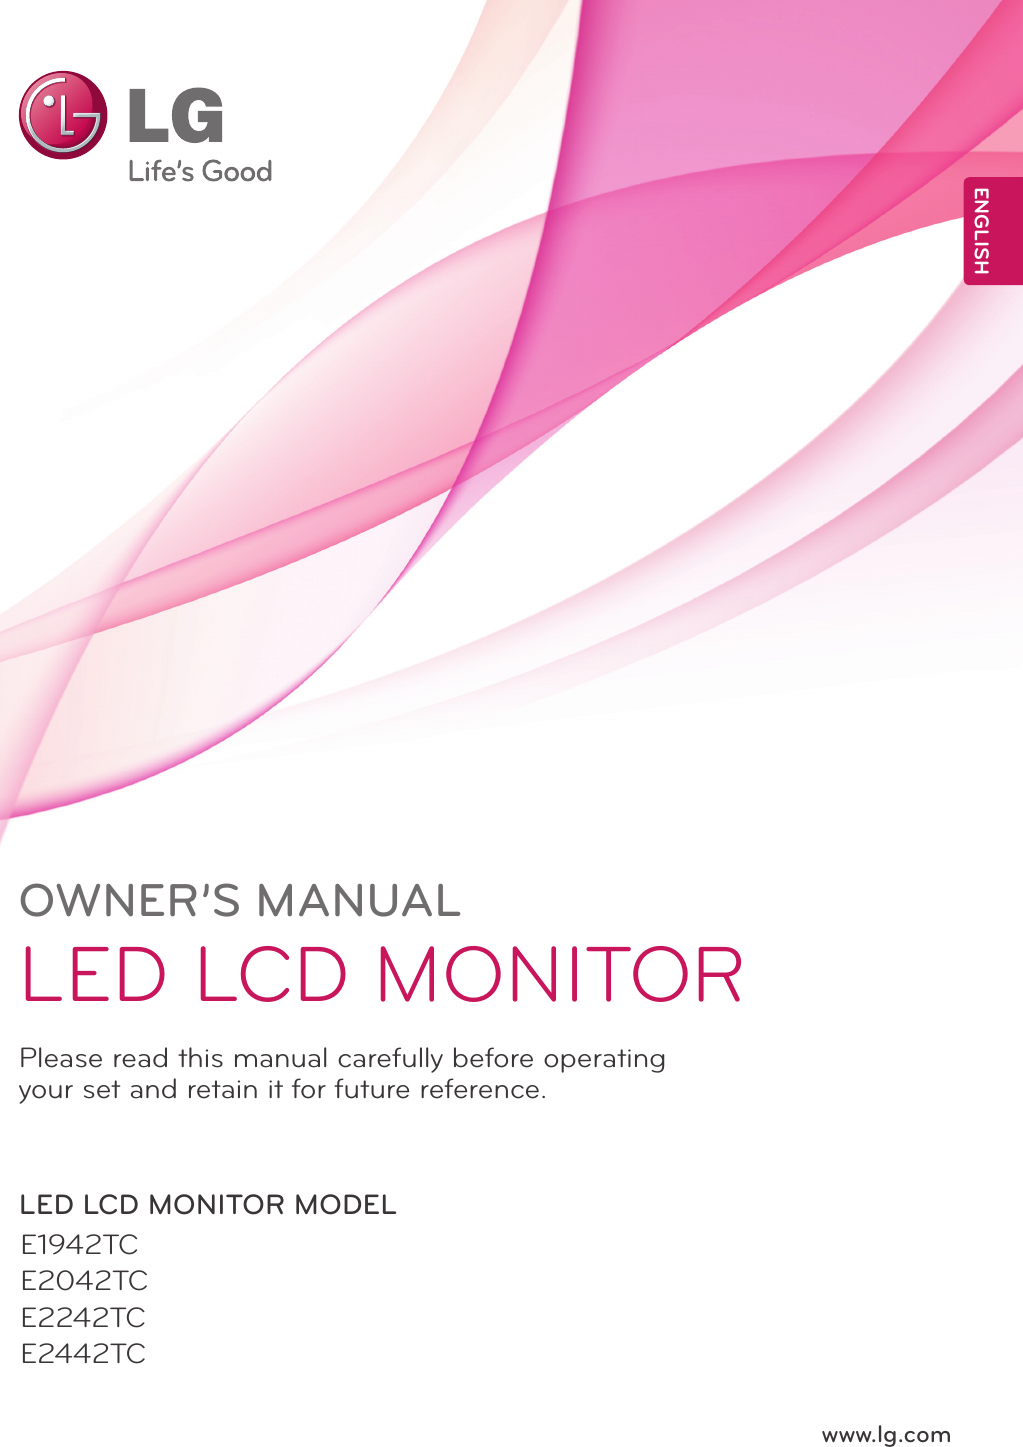 www.lg.comOWNER’S MANUALLED LCD MONITORE1942TCE2042TCE2242TCE2442TCPlease read this manual carefully before operating your set and retain it for future reference.LED LCD MONITOR MODELENGLISH